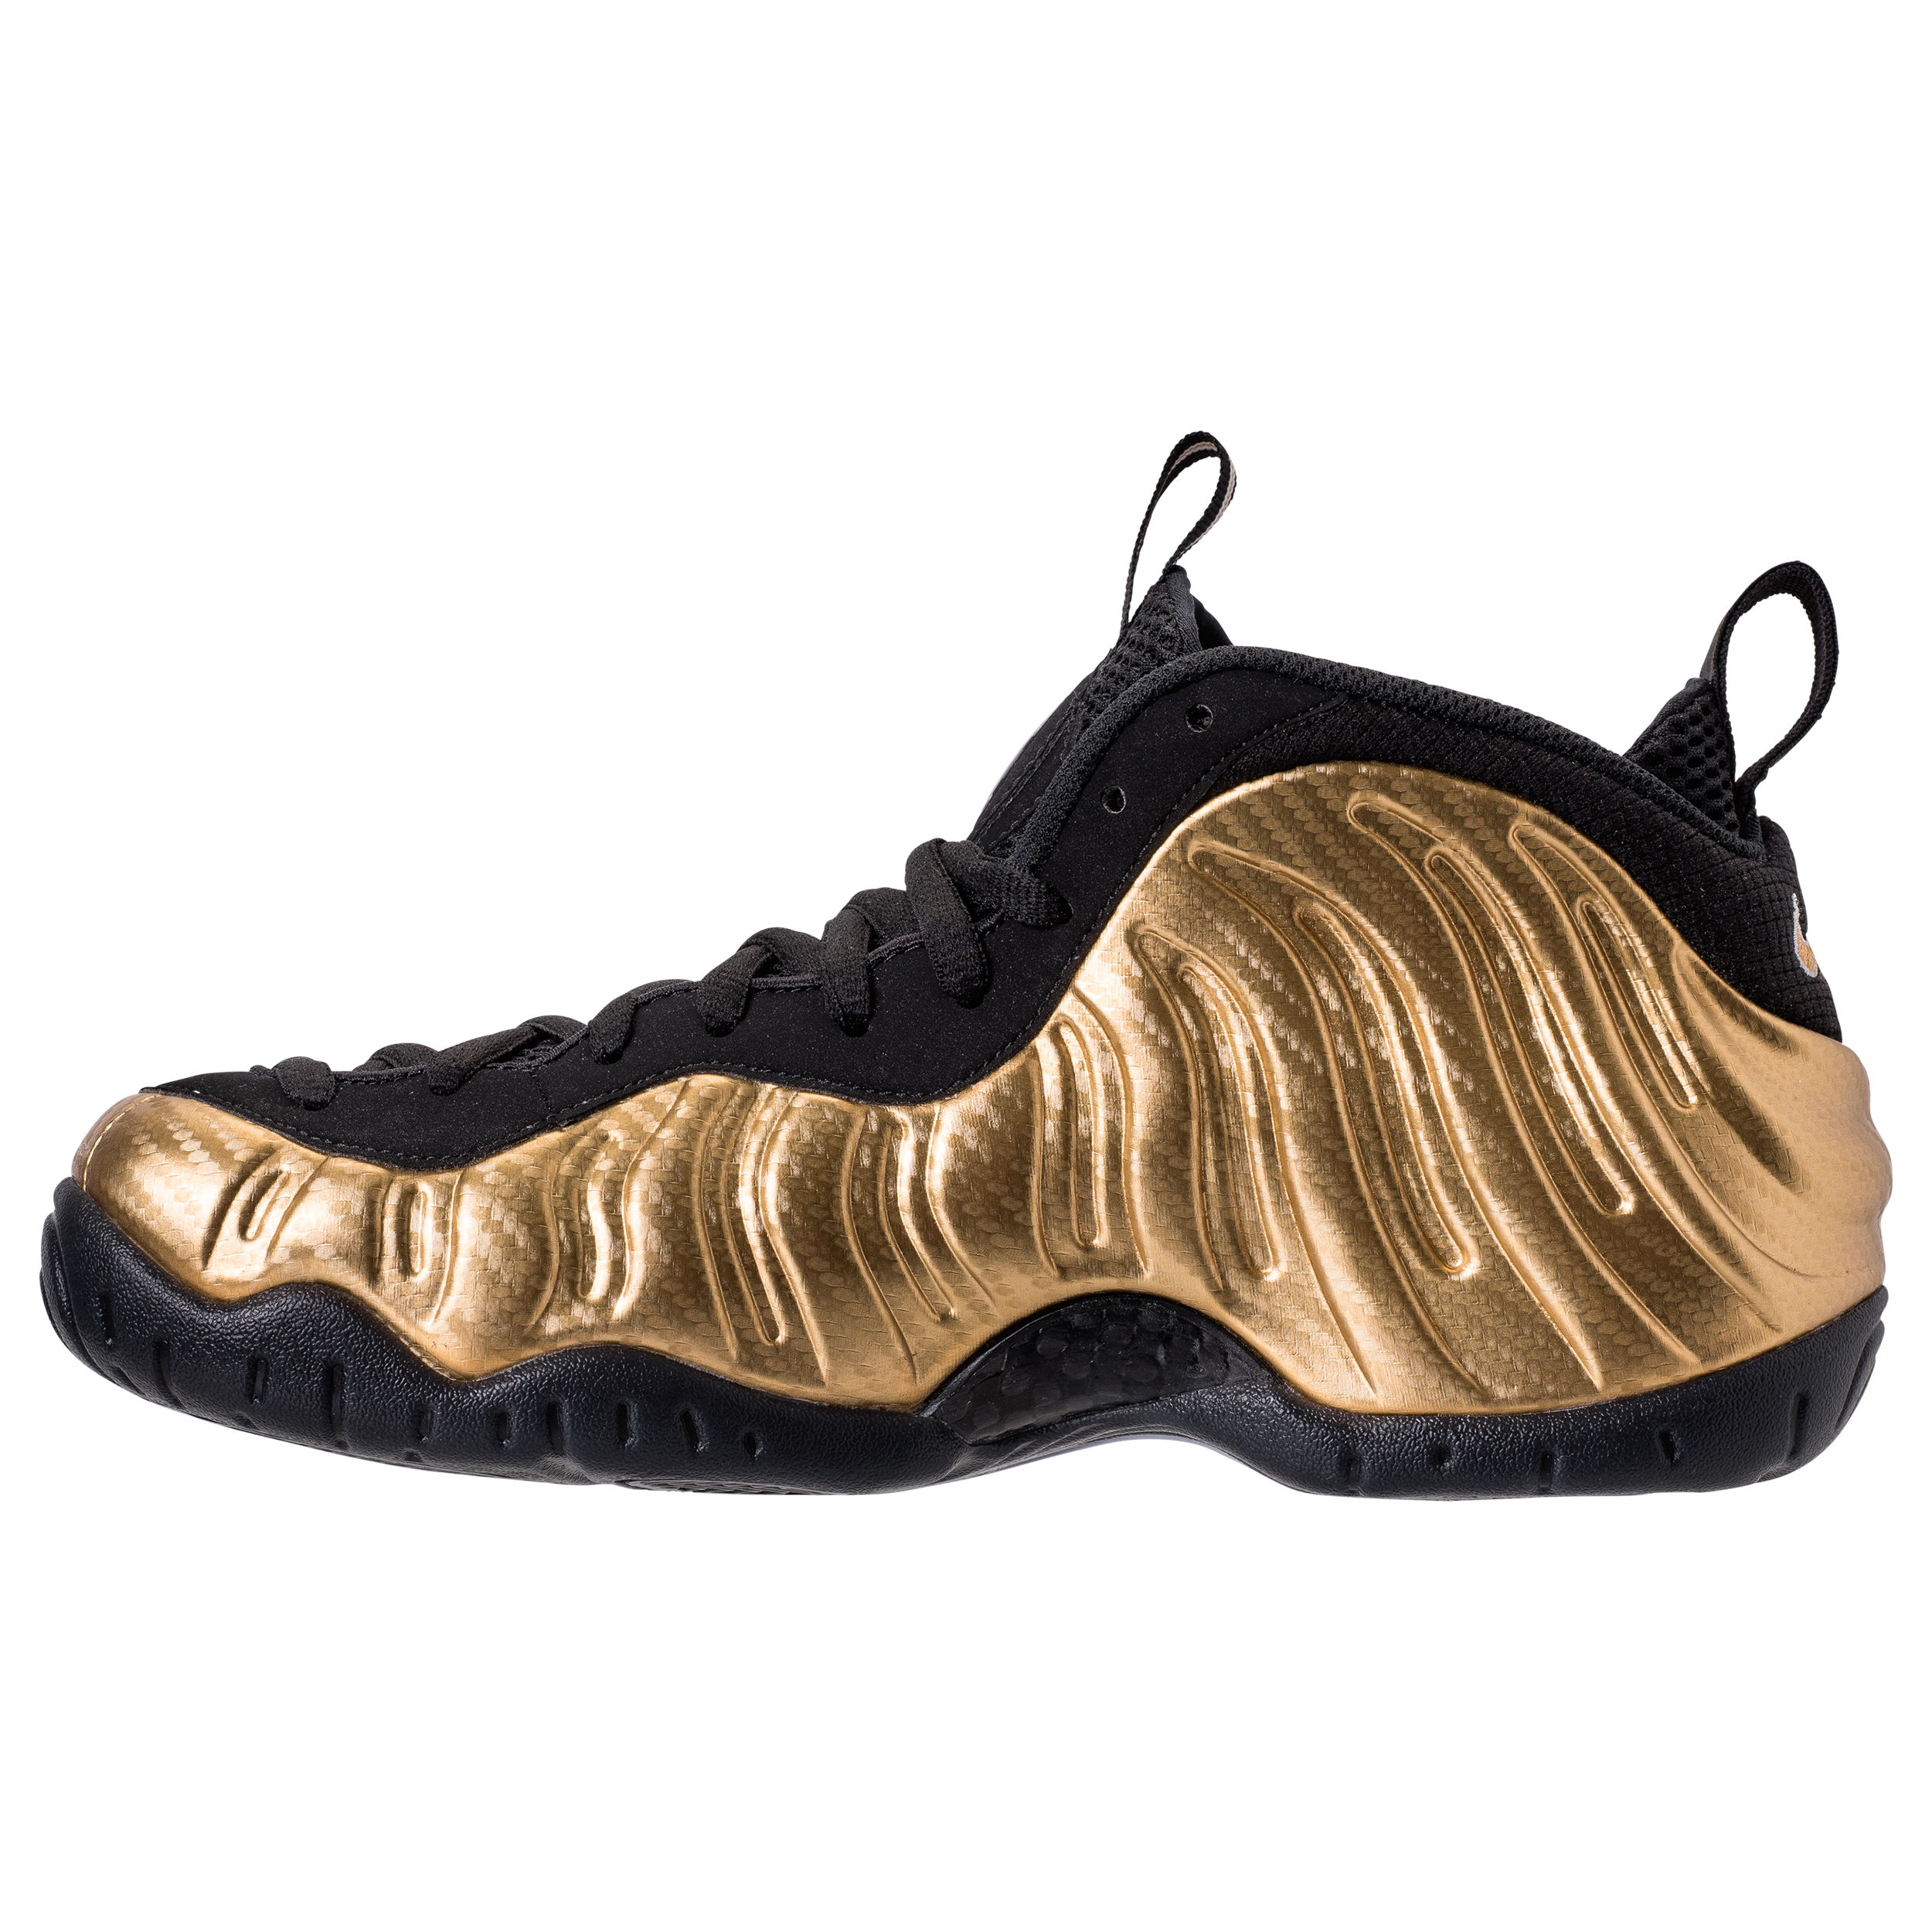 Detailed Look at the Air Foamposite Pro 'Metallic Gold' - WearTesters